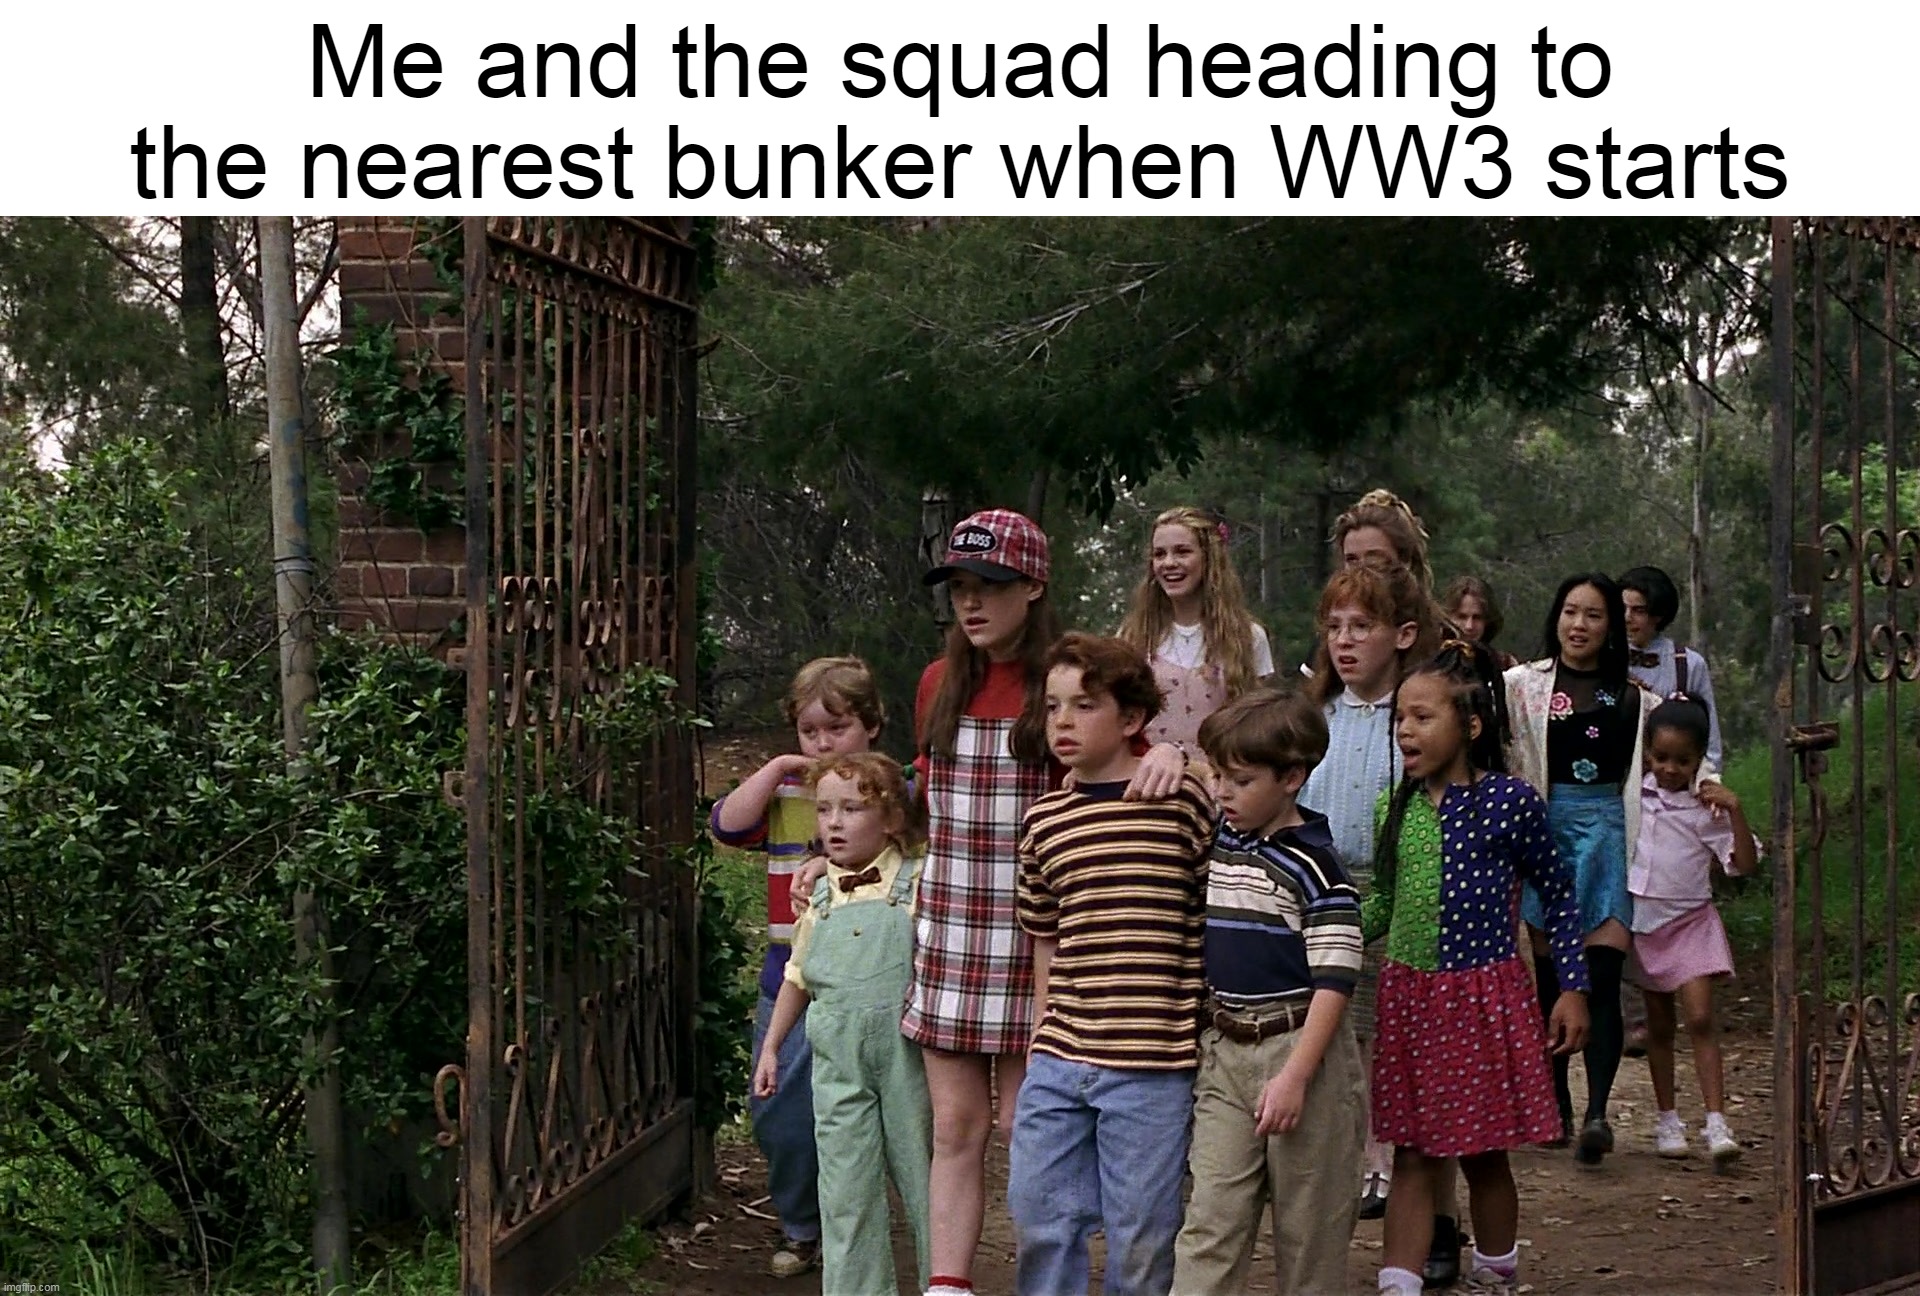 Me and the squad heading to the nearest bunker when WW3 starts | image tagged in meme,memes,humor,ww3,dank memes,world war 3 | made w/ Imgflip meme maker